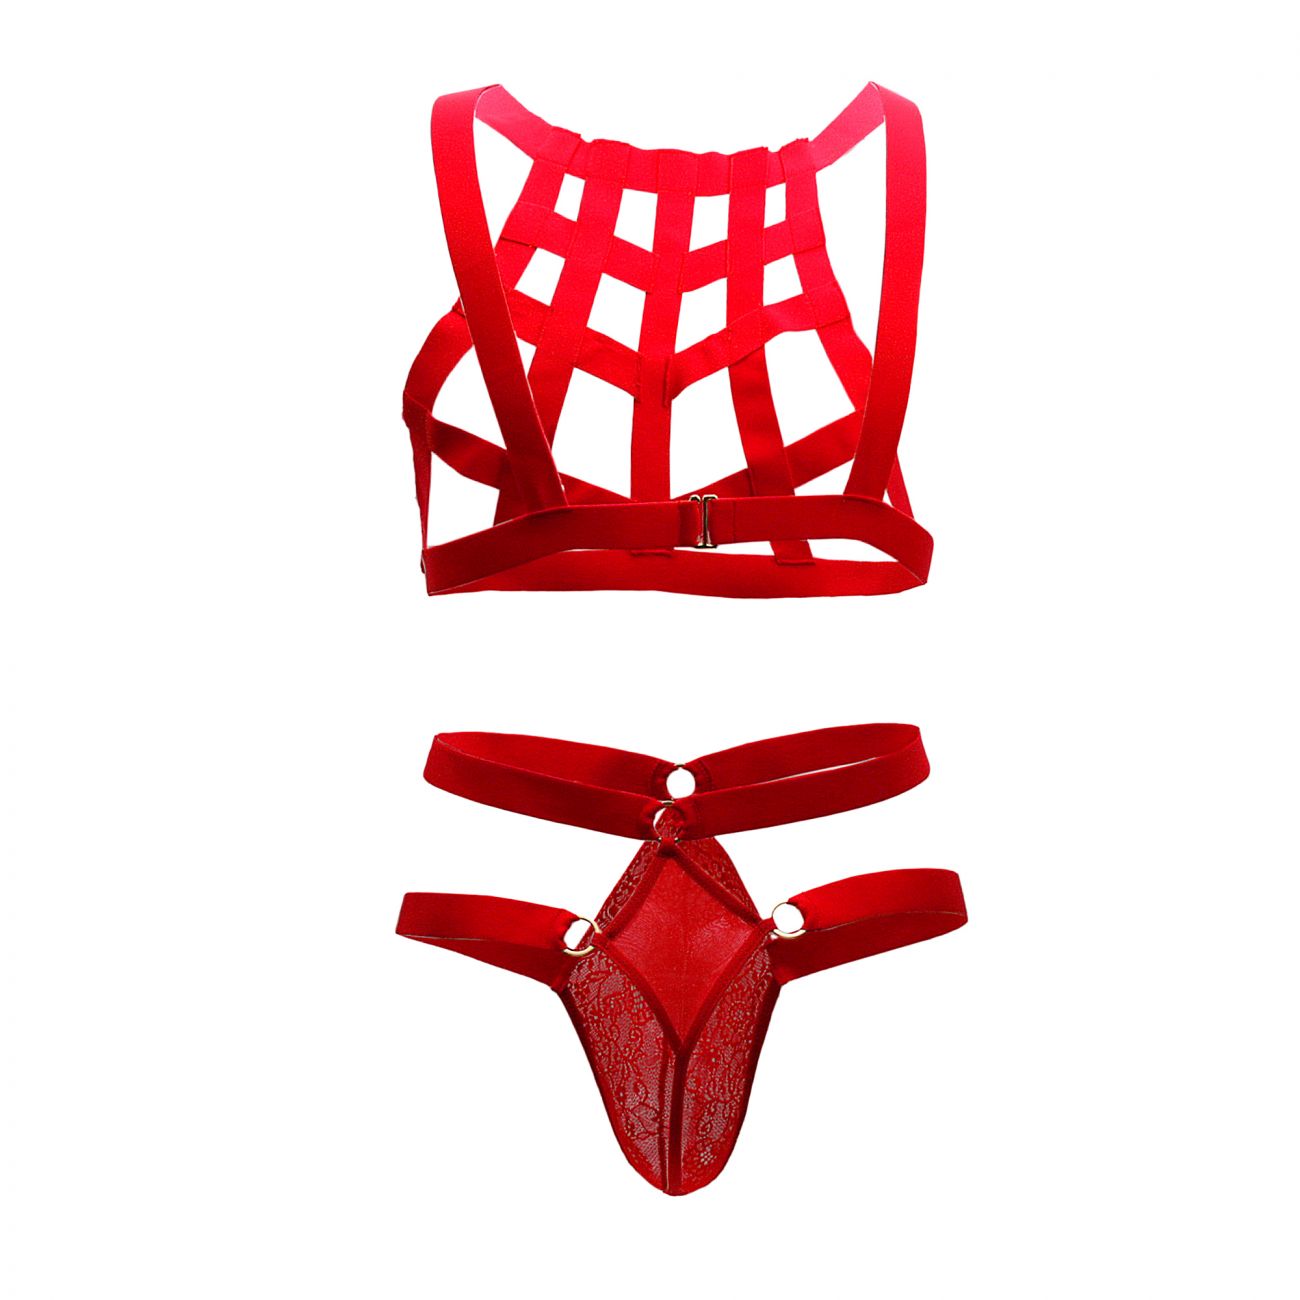 CandyMan 99419 Cage Harness Thongs Red